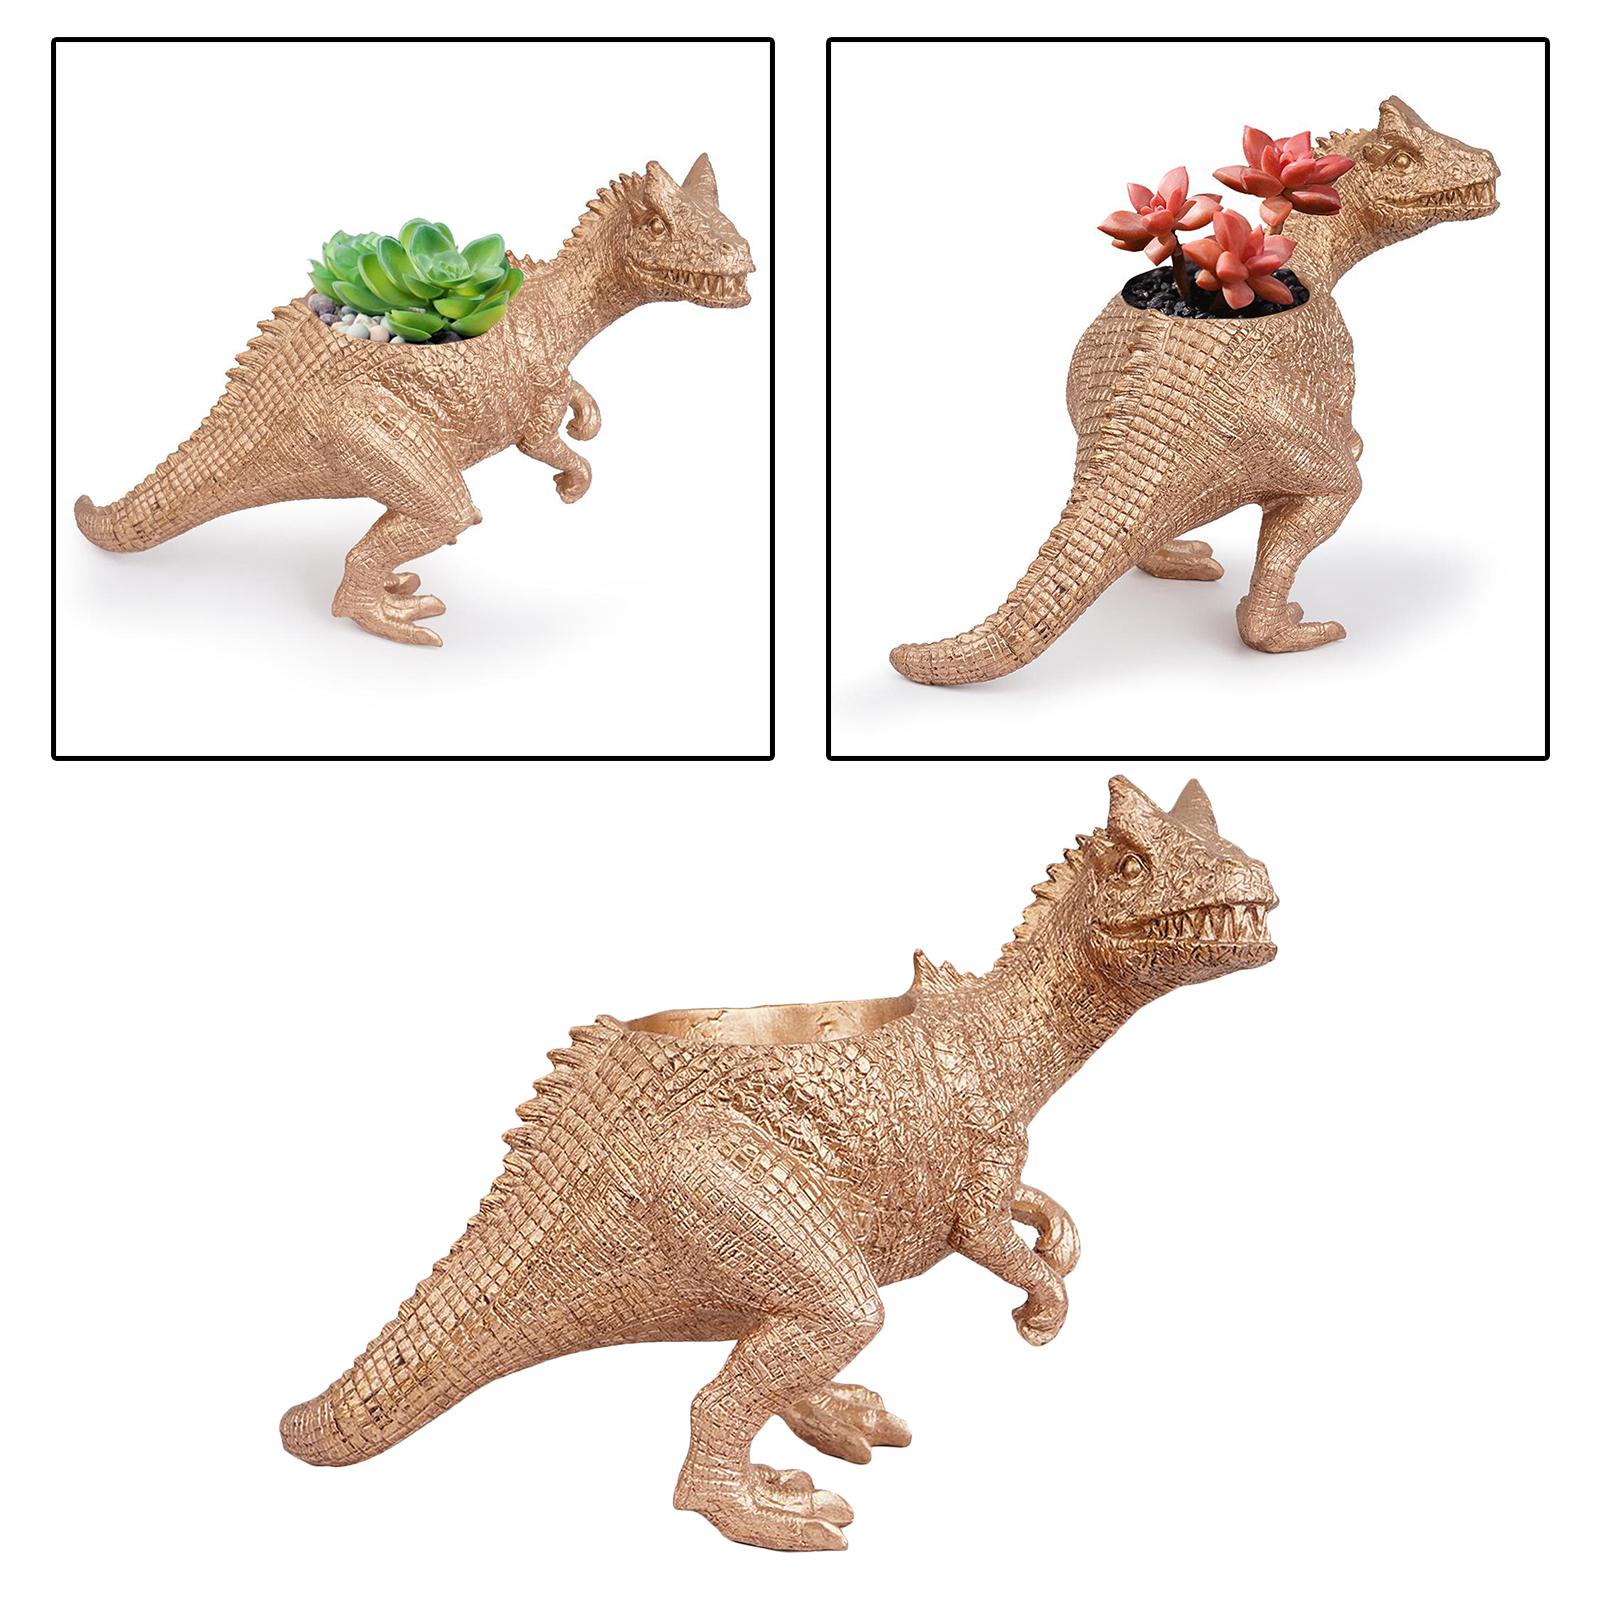 Cute Dinosaur Flower Pot Planter Container for Home Office Decor Style 2